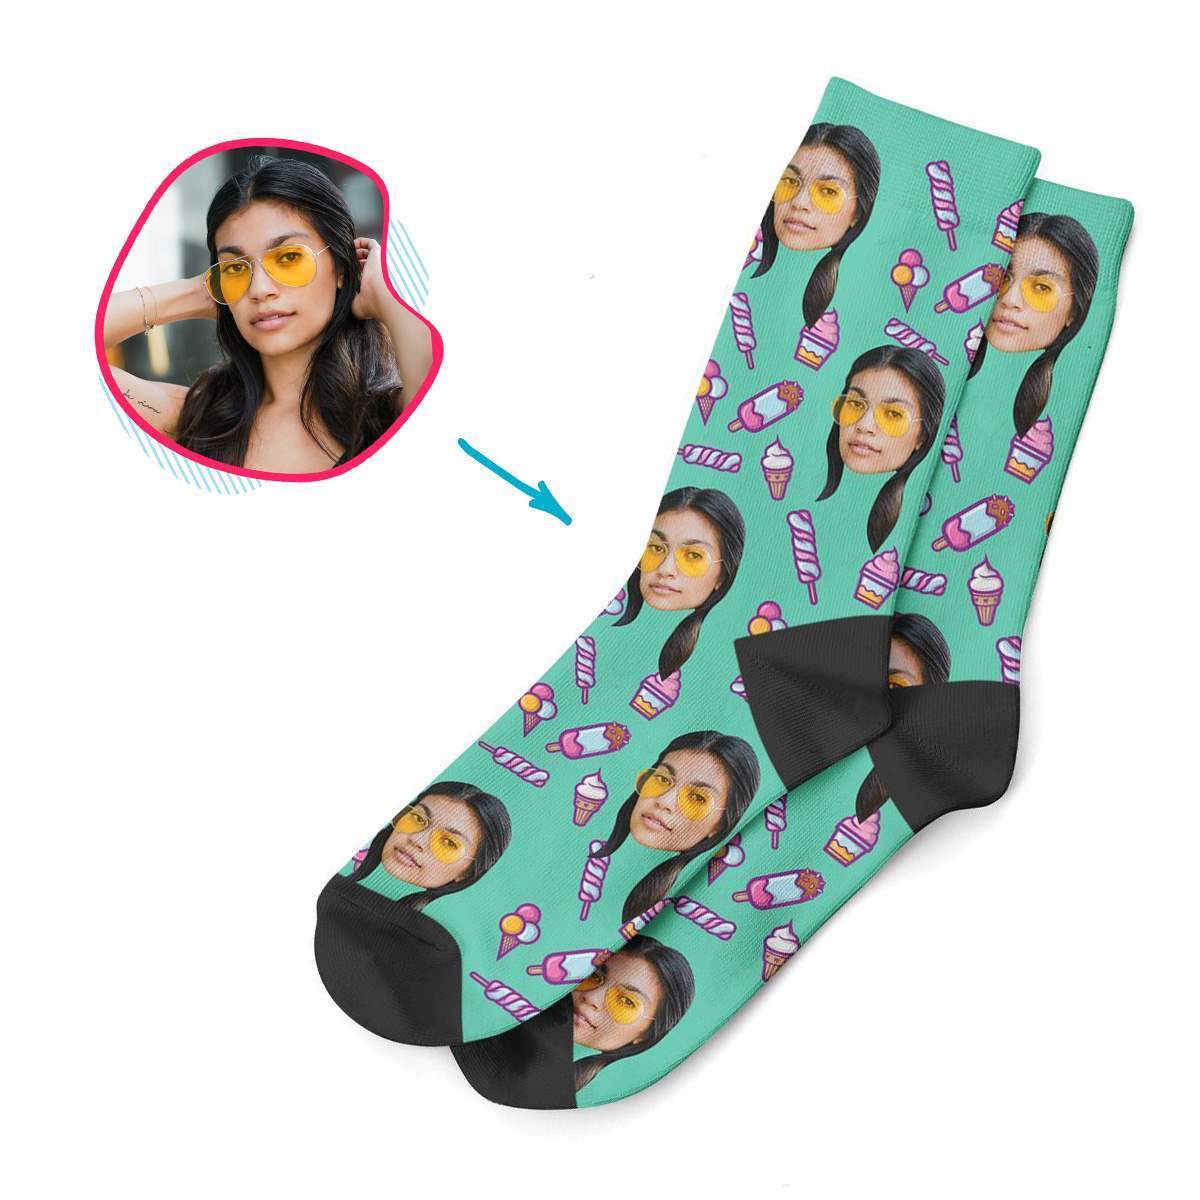 Candies Personalized Socks